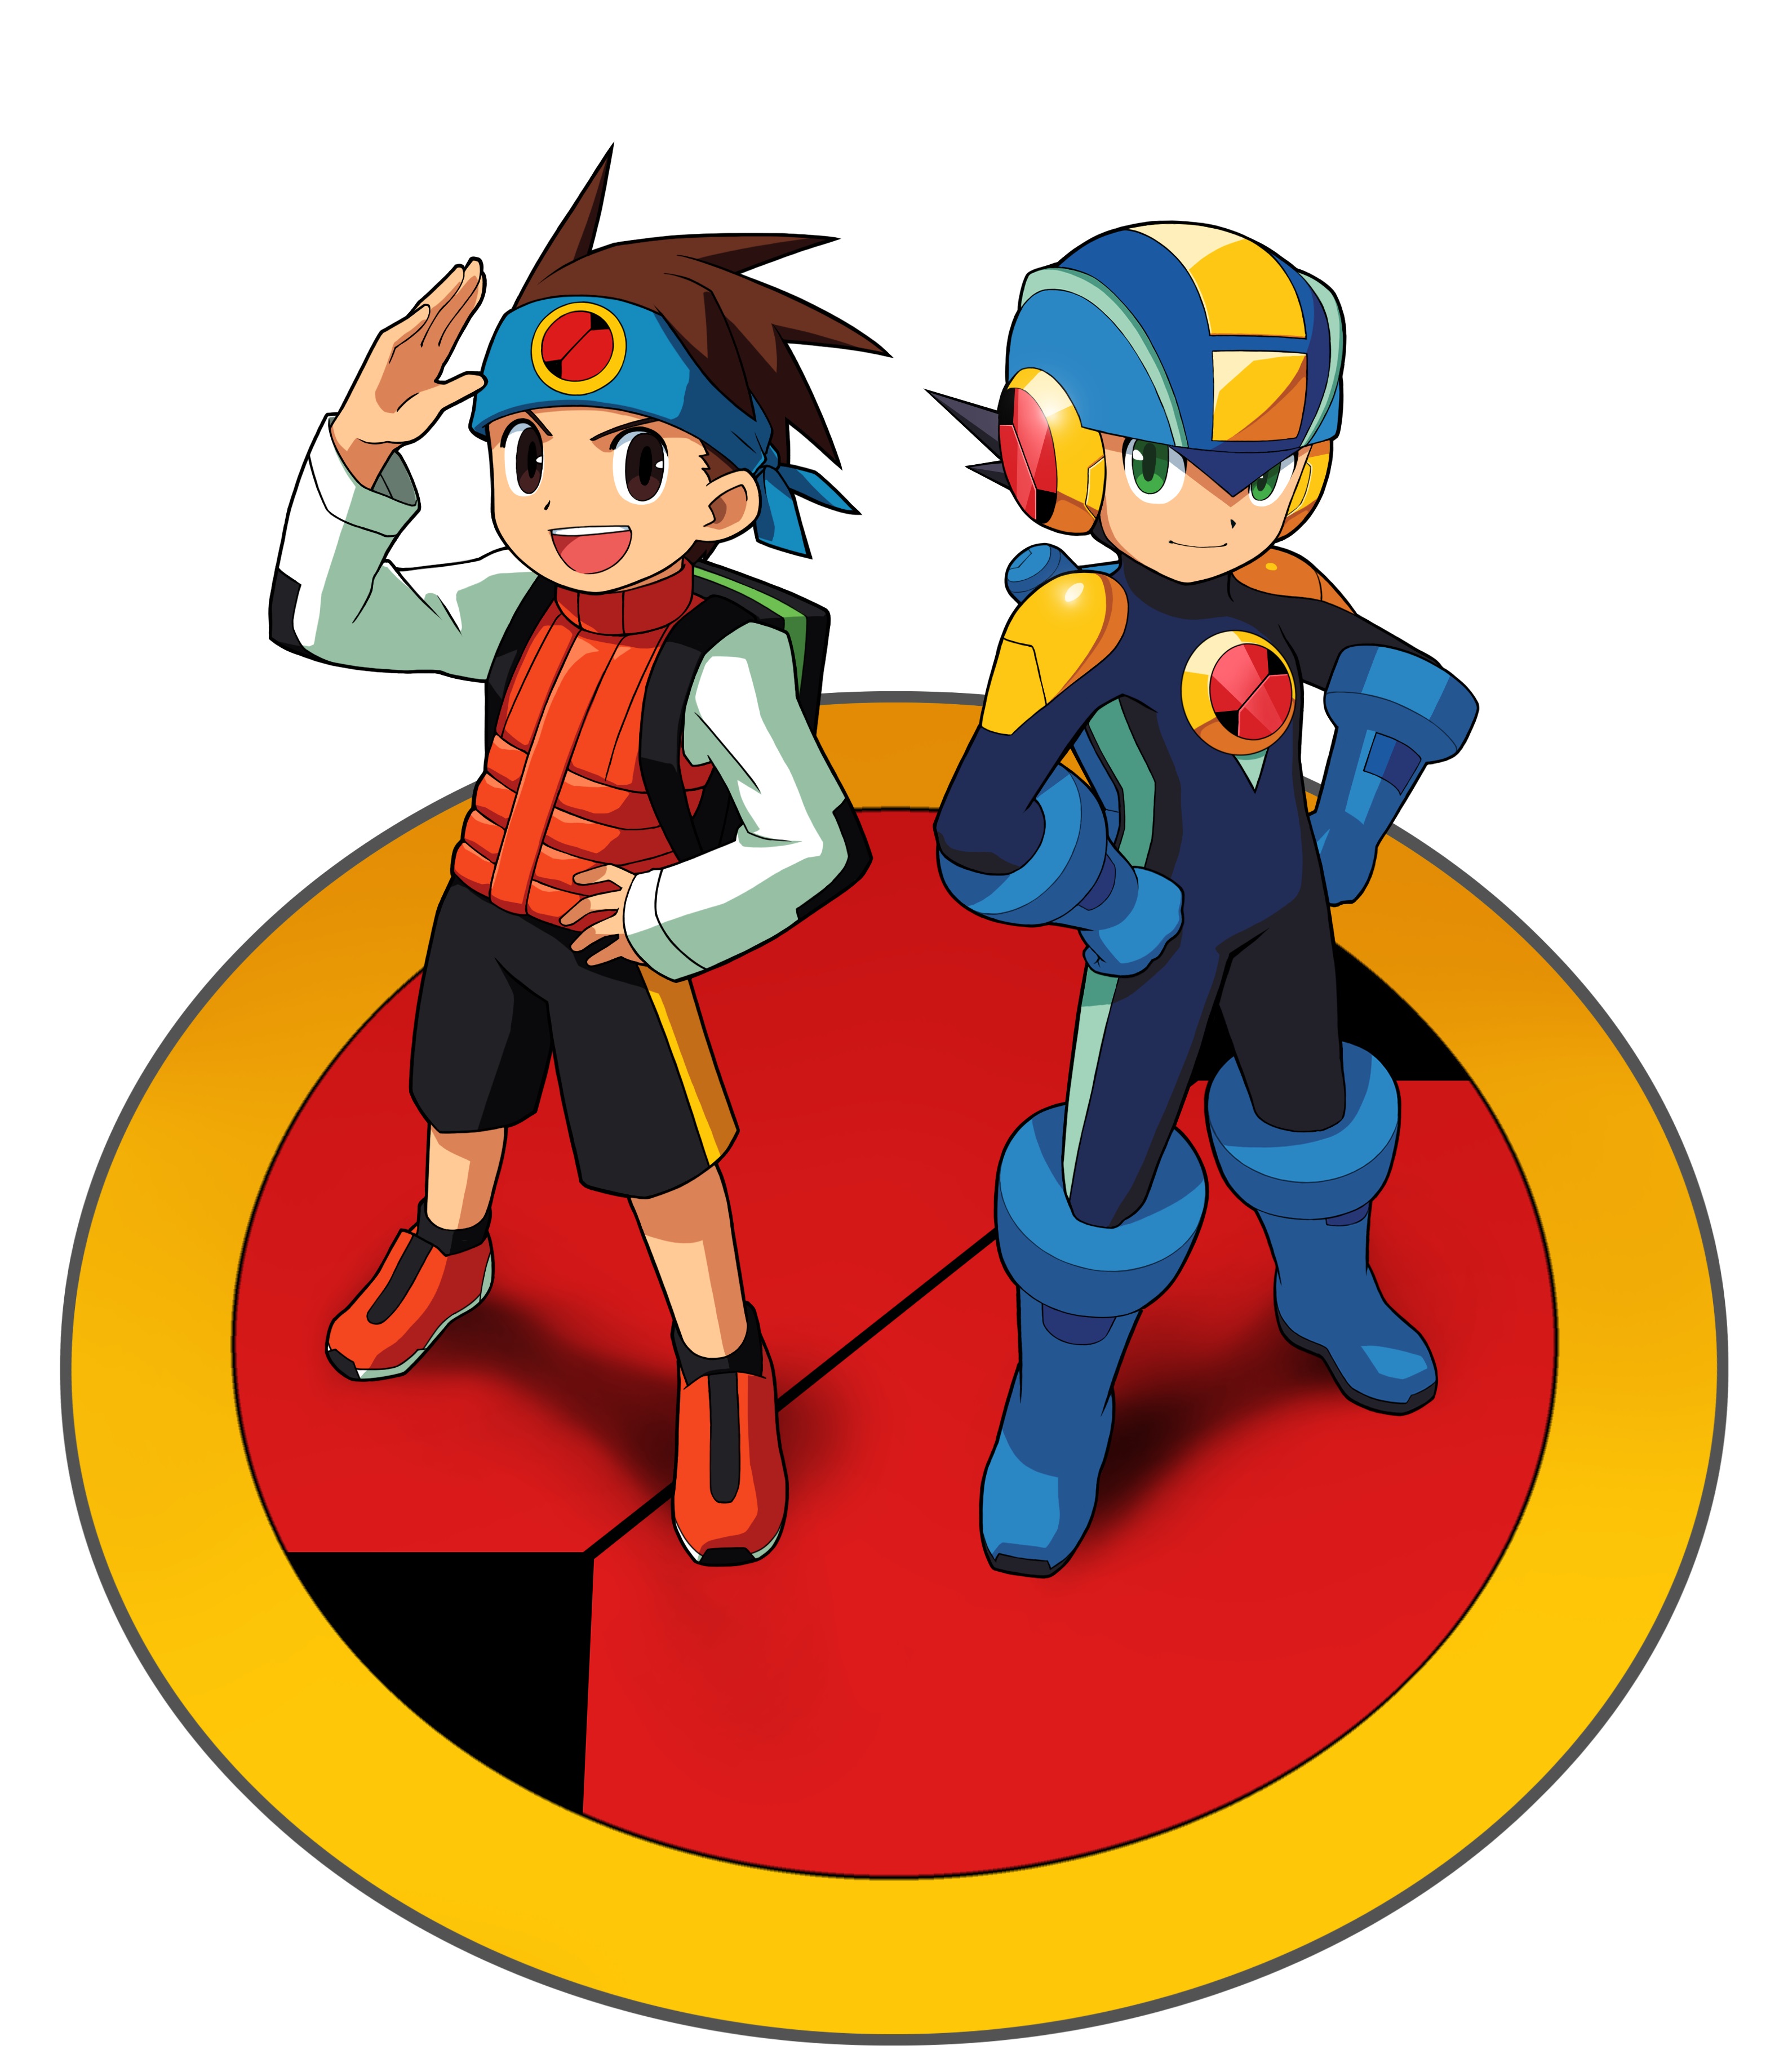 one-step-from-eden-megaman-battle-network-2020-cyber-space-gamers